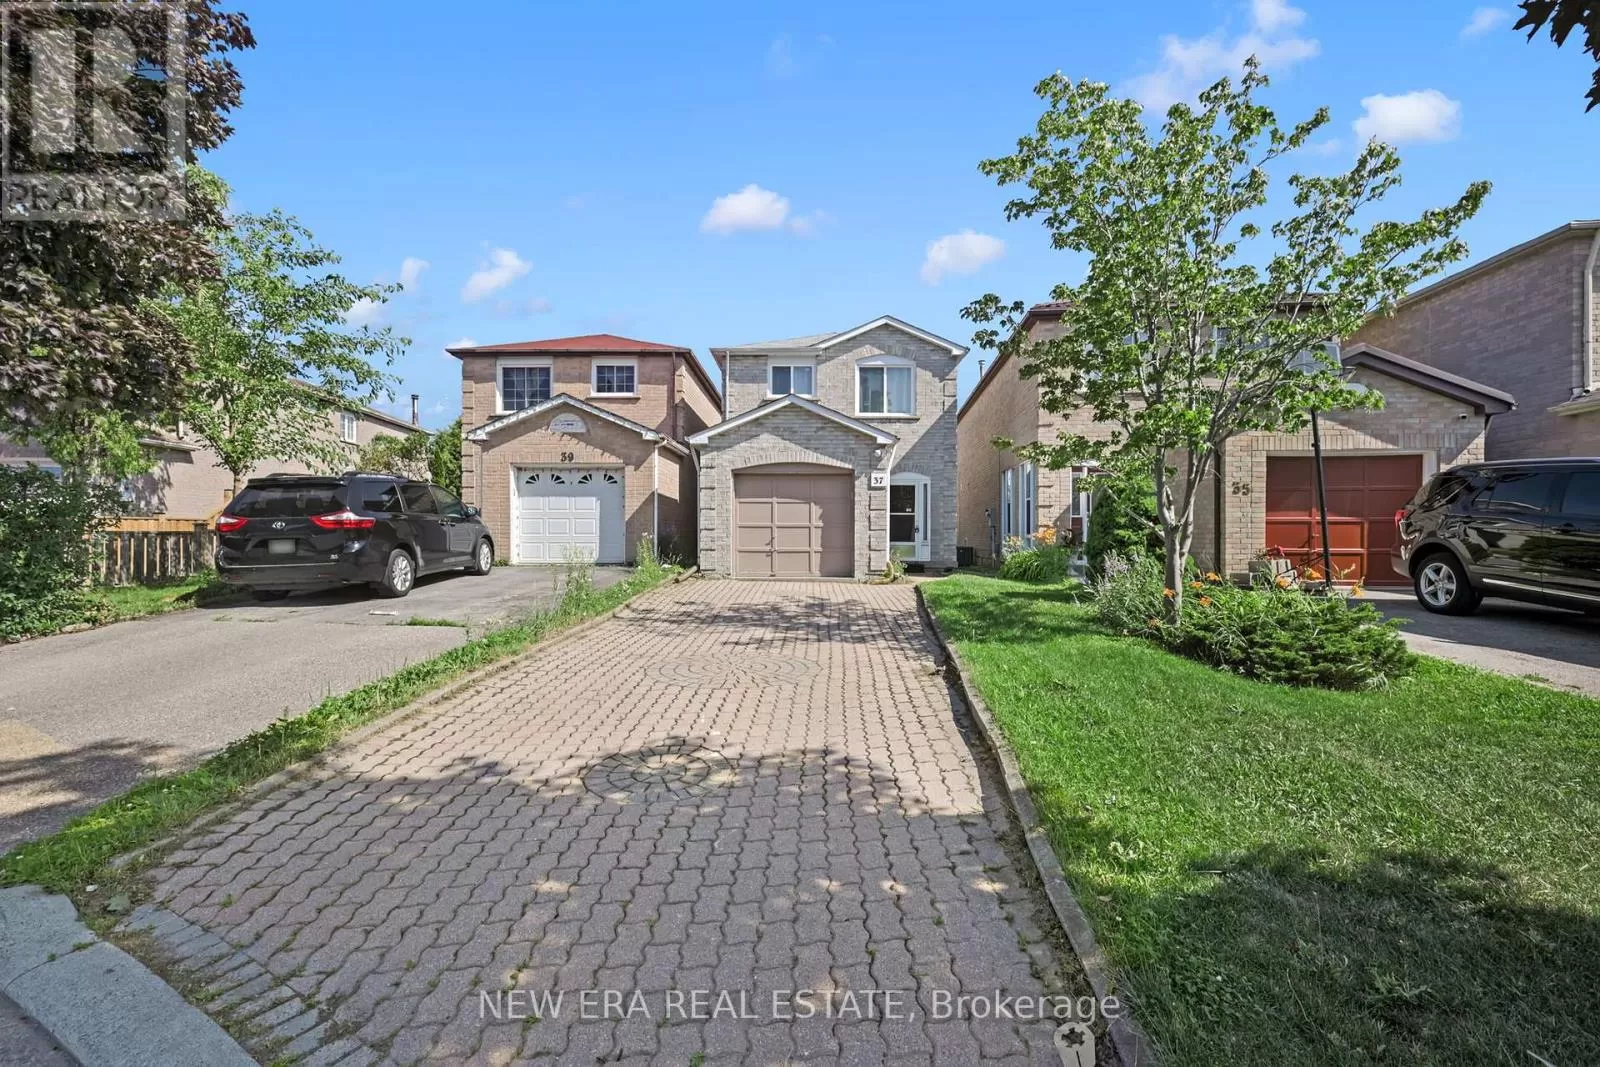 House for rent: 37 Stather Cres, Markham, Ontario L3S 1C9